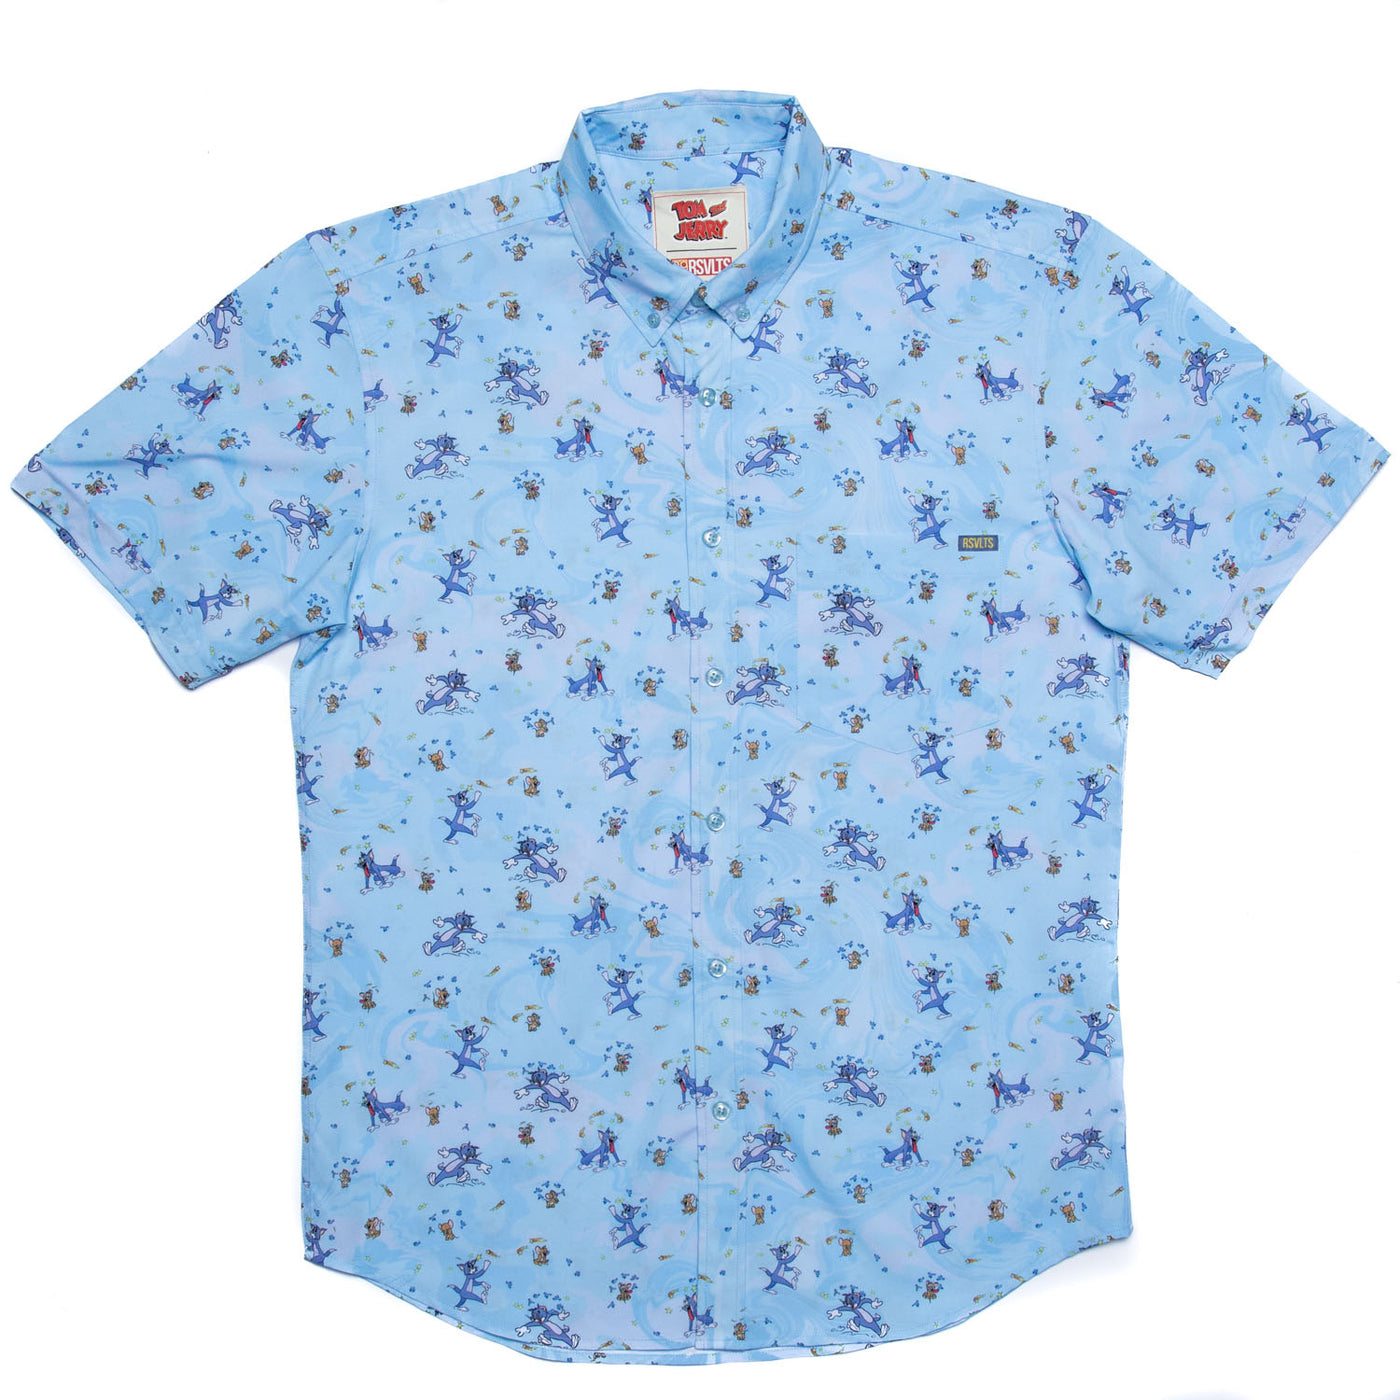 Tom and Jerry Dazed and Confused Button Down Shirt